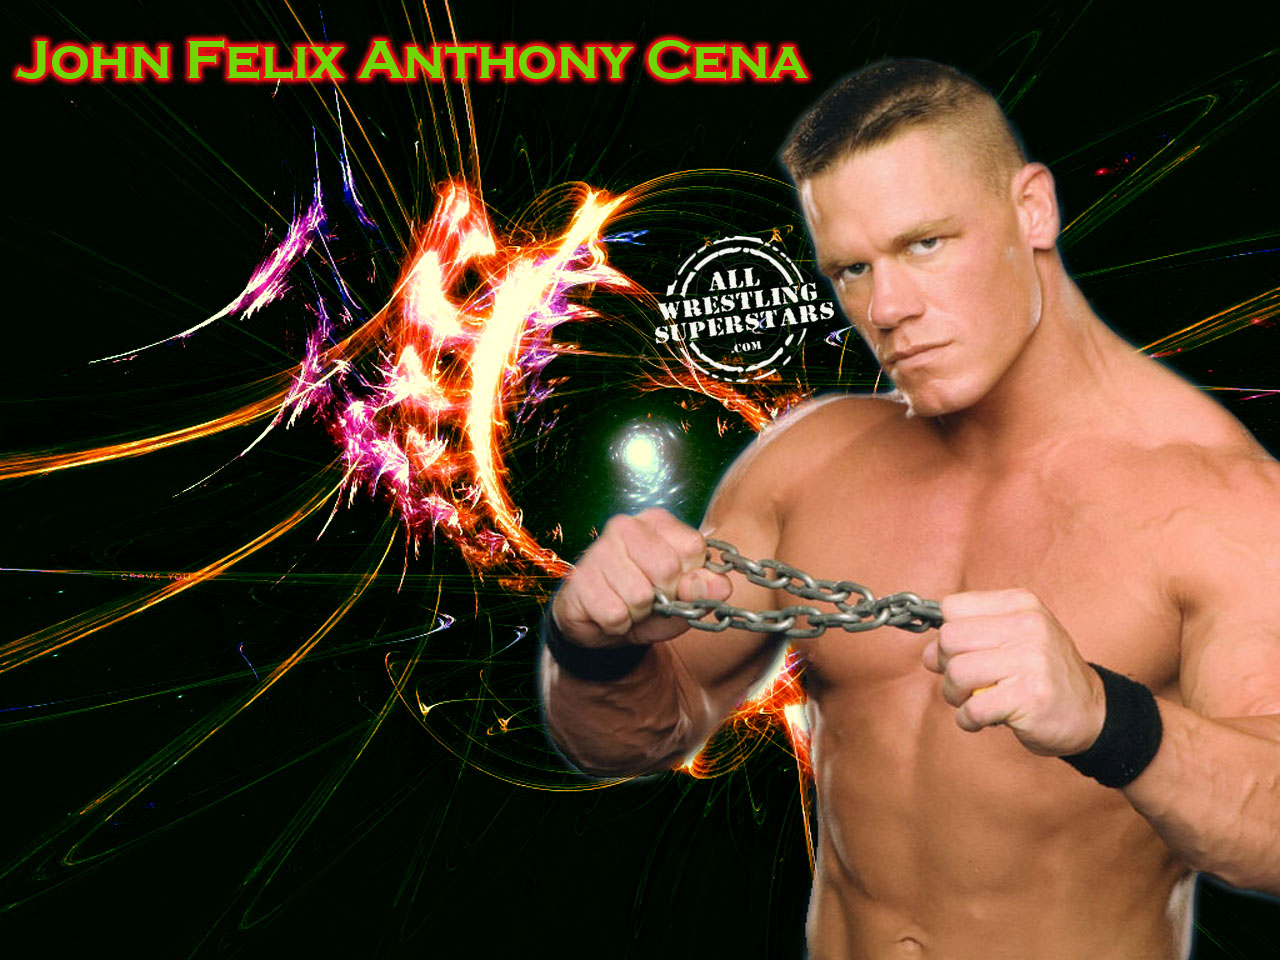 John Felix Anthony Cena In Serious Pose With His Chain Click On Image